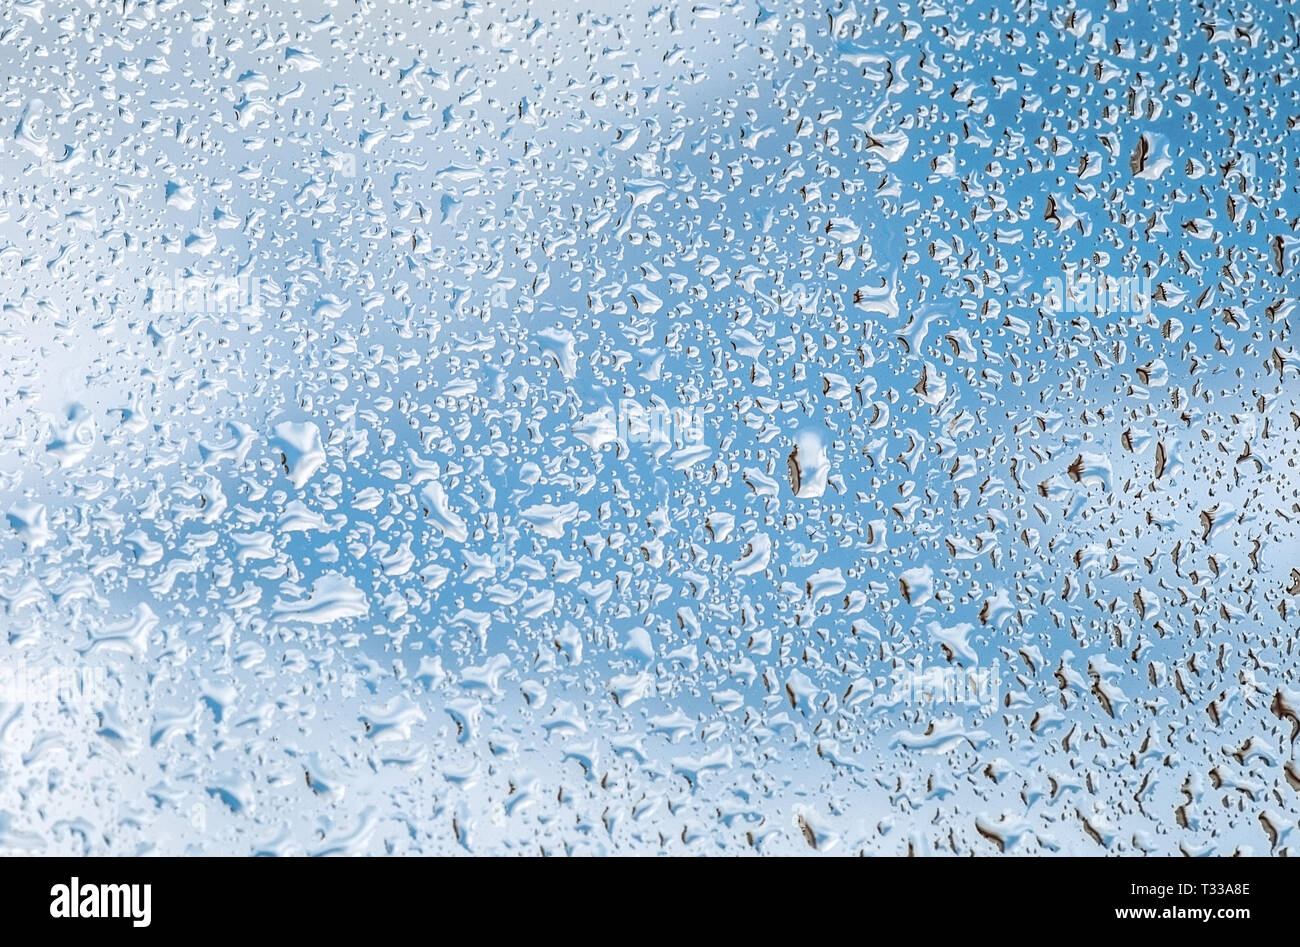 water drops on window glass texture or background Stock Photo